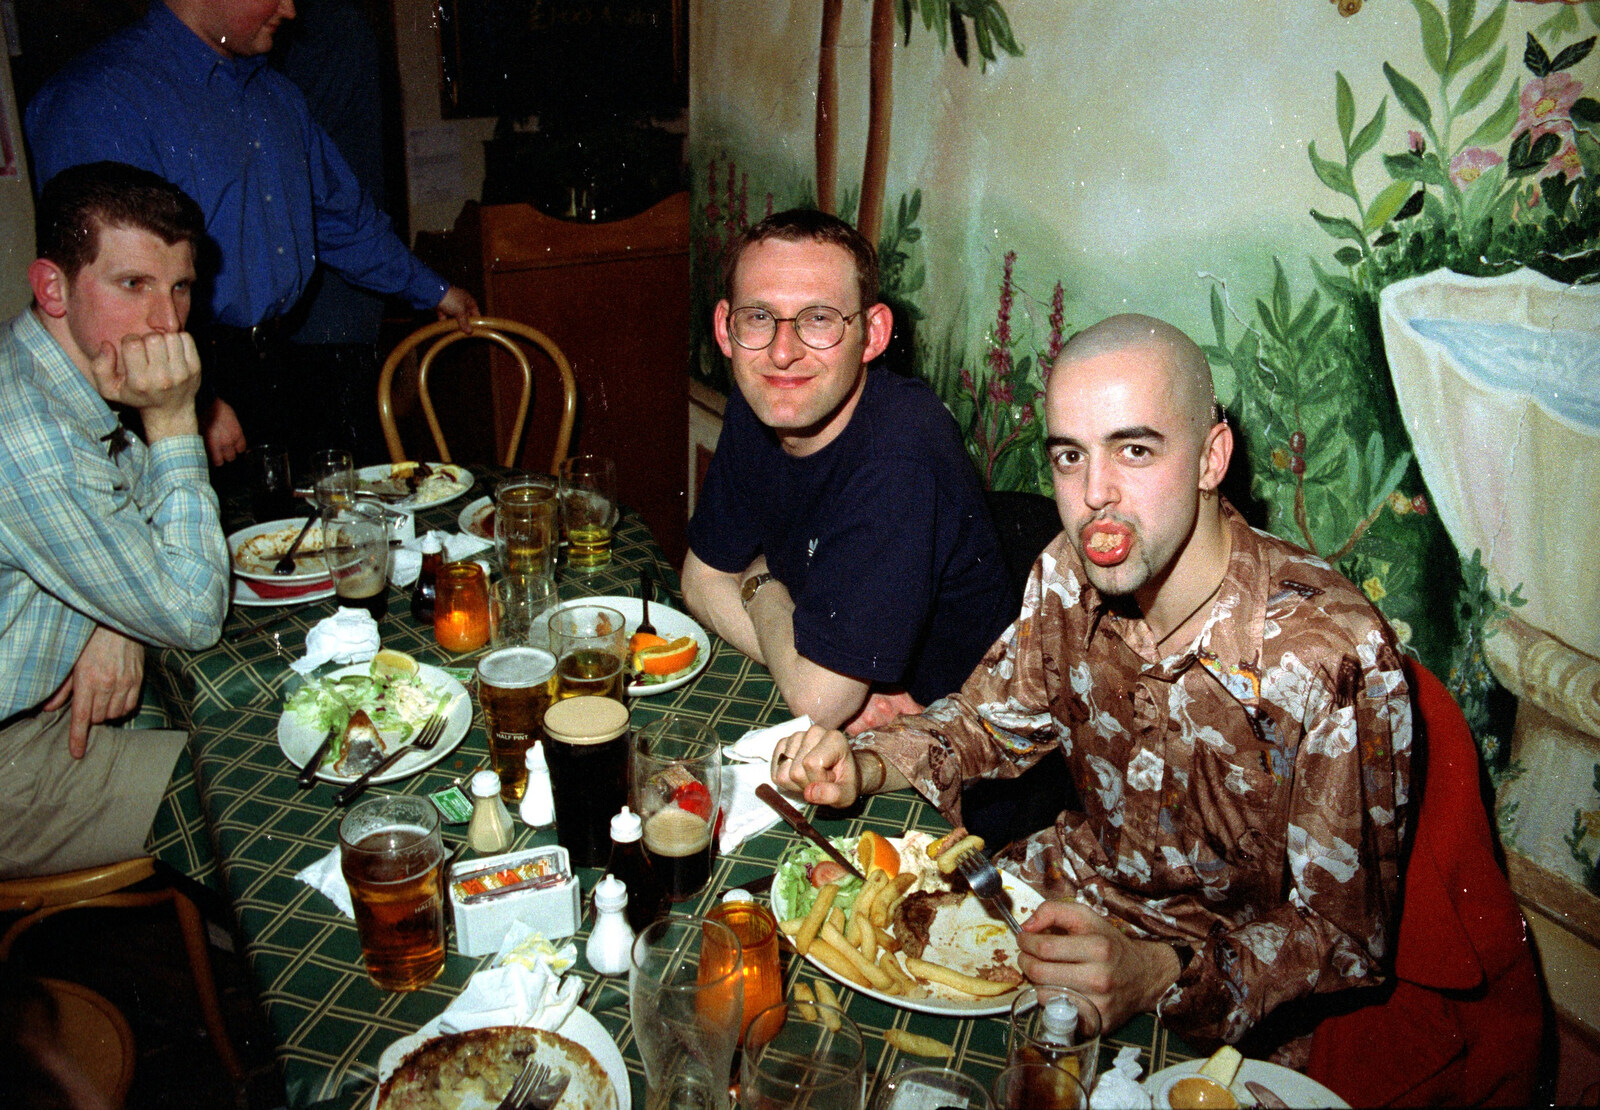 Trev shows off his partially-masticated food from Dougie's Birthday and Adrian Leaves CISU, Ipswich, Suffolk - 29th June 1997